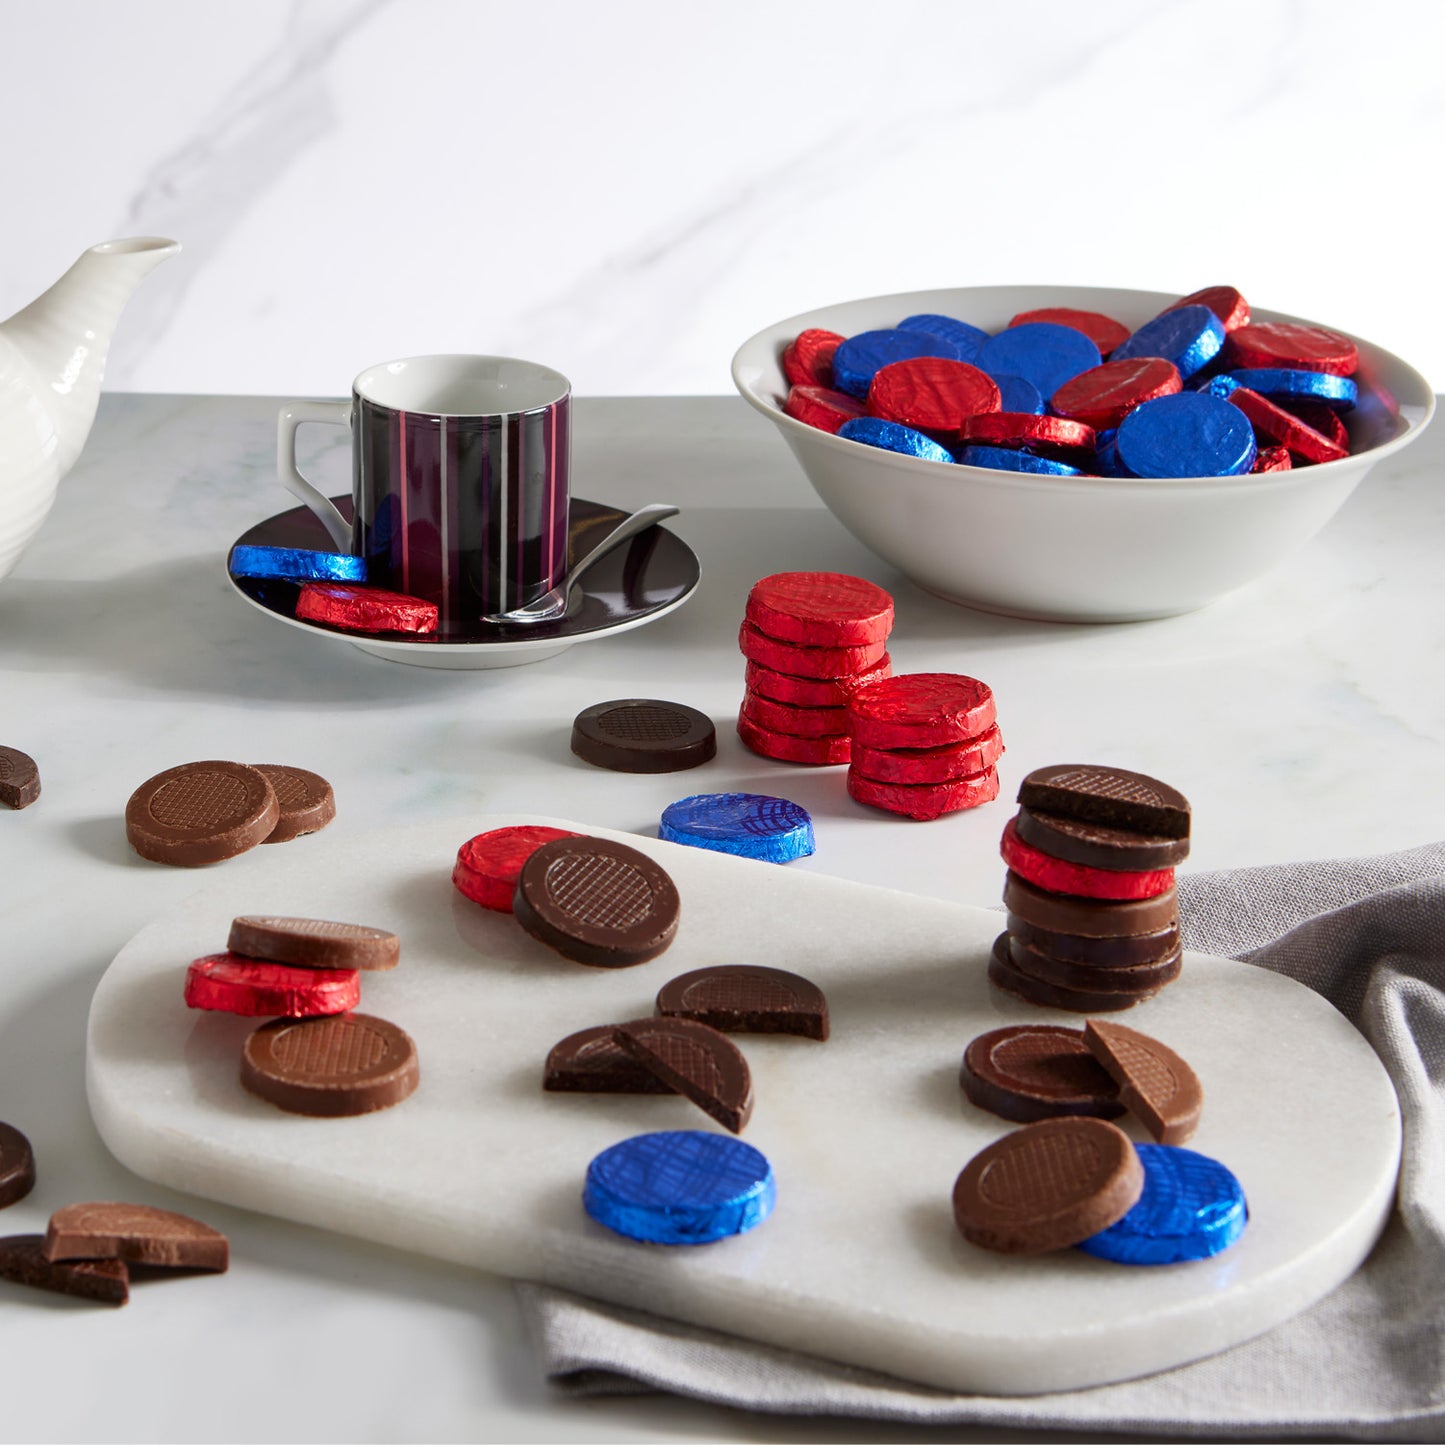 Dark chocolate discs individually wrapped in red foil